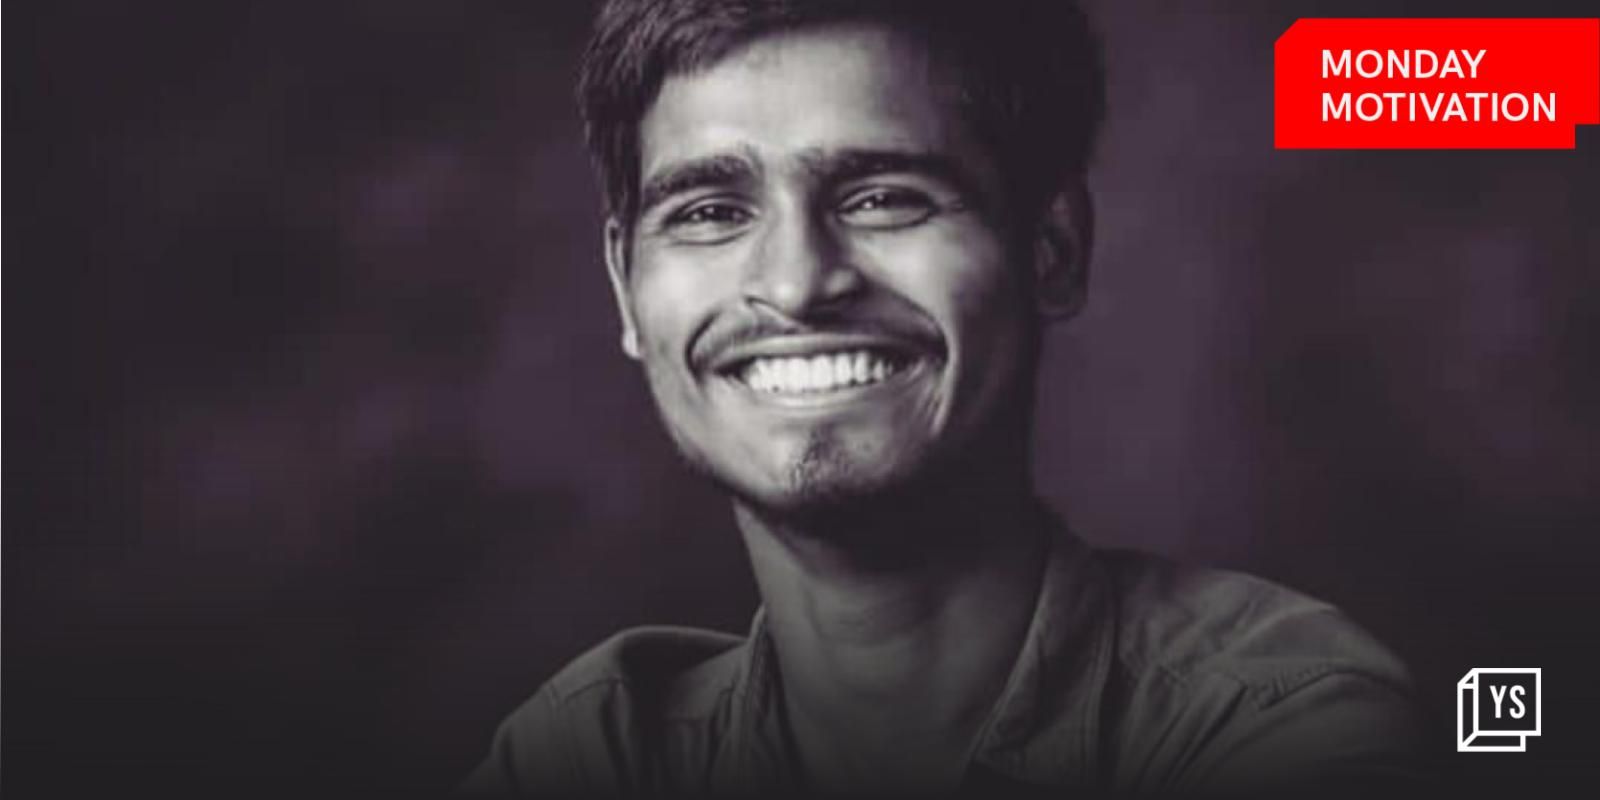 From slums to reputed filmmaking institute: The story of a 20-year old photography enthusiast